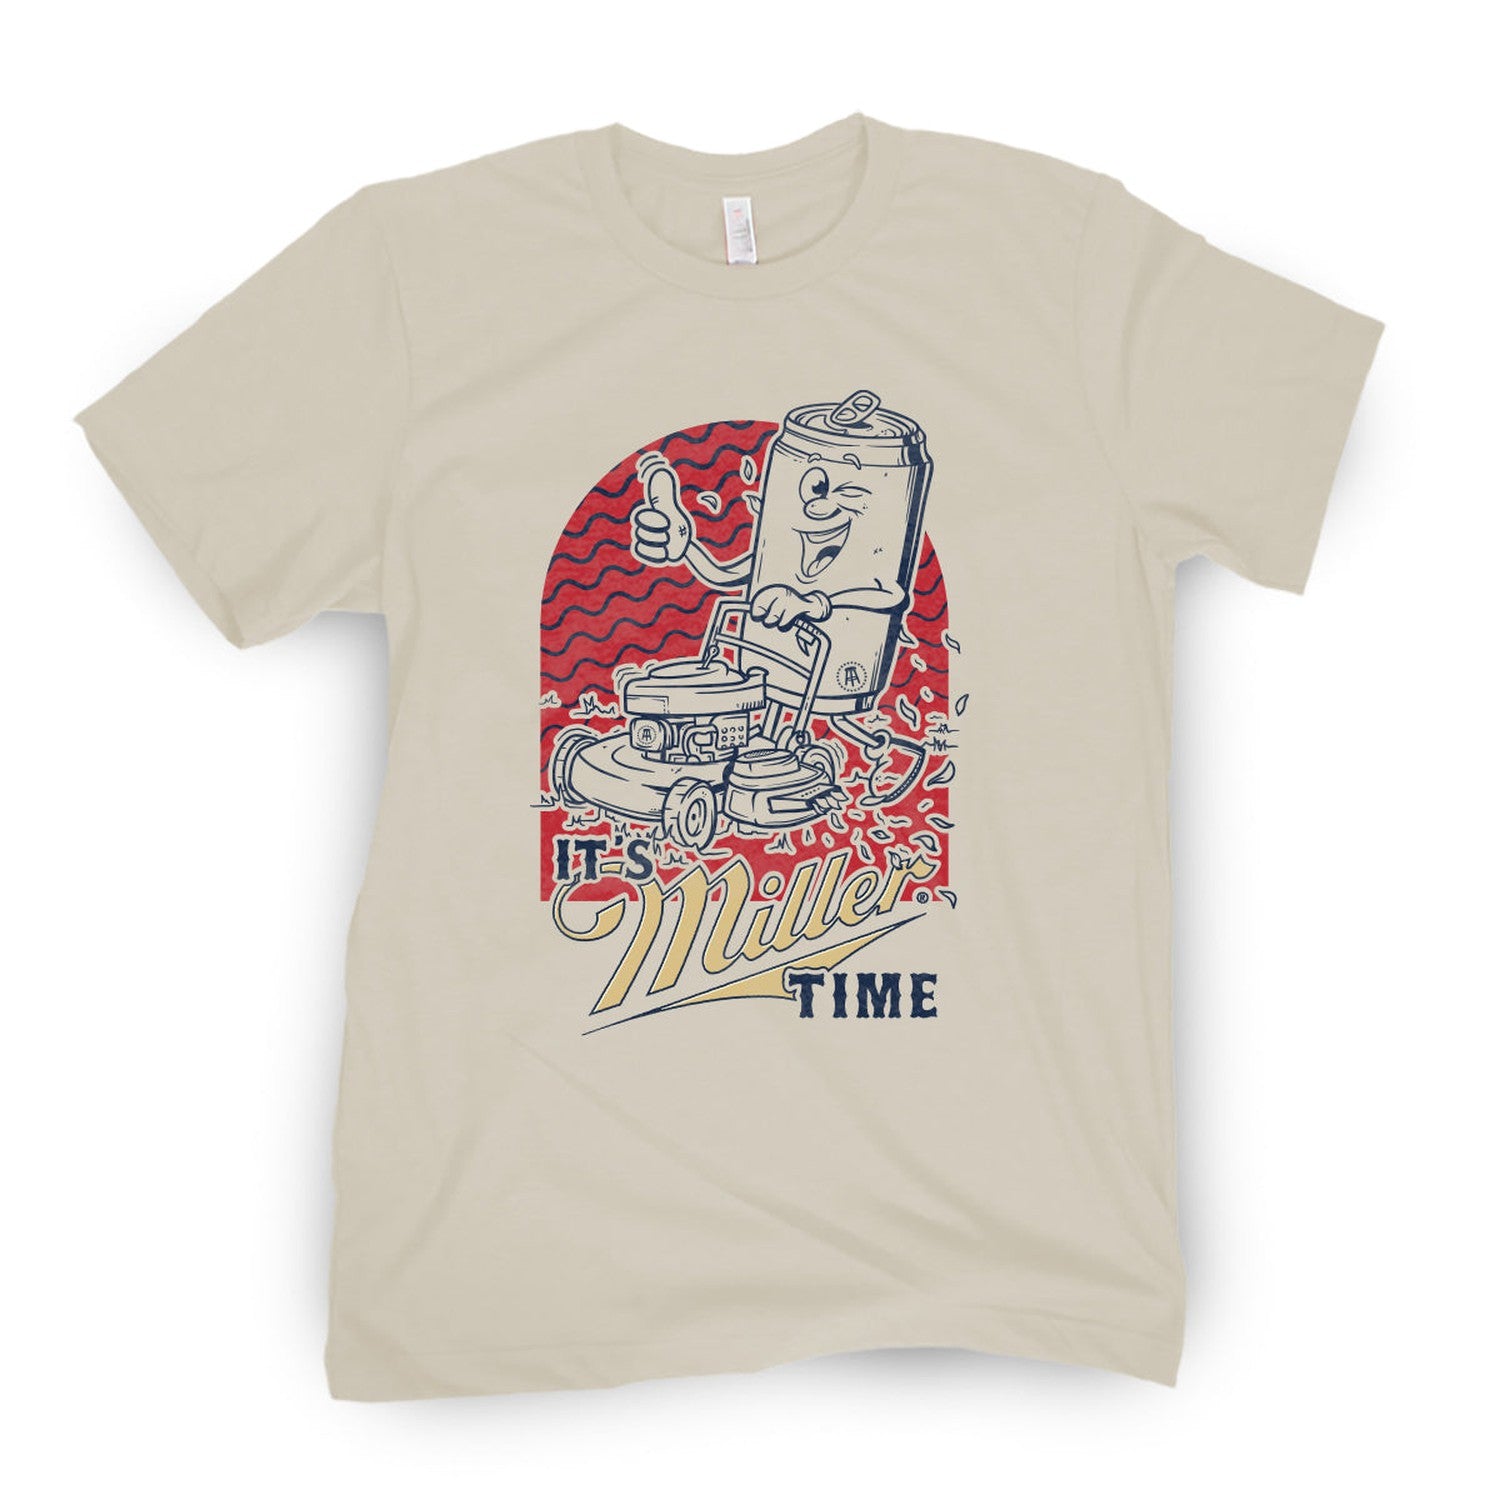 Barstool Chicago It's Miller Time Tee Tan